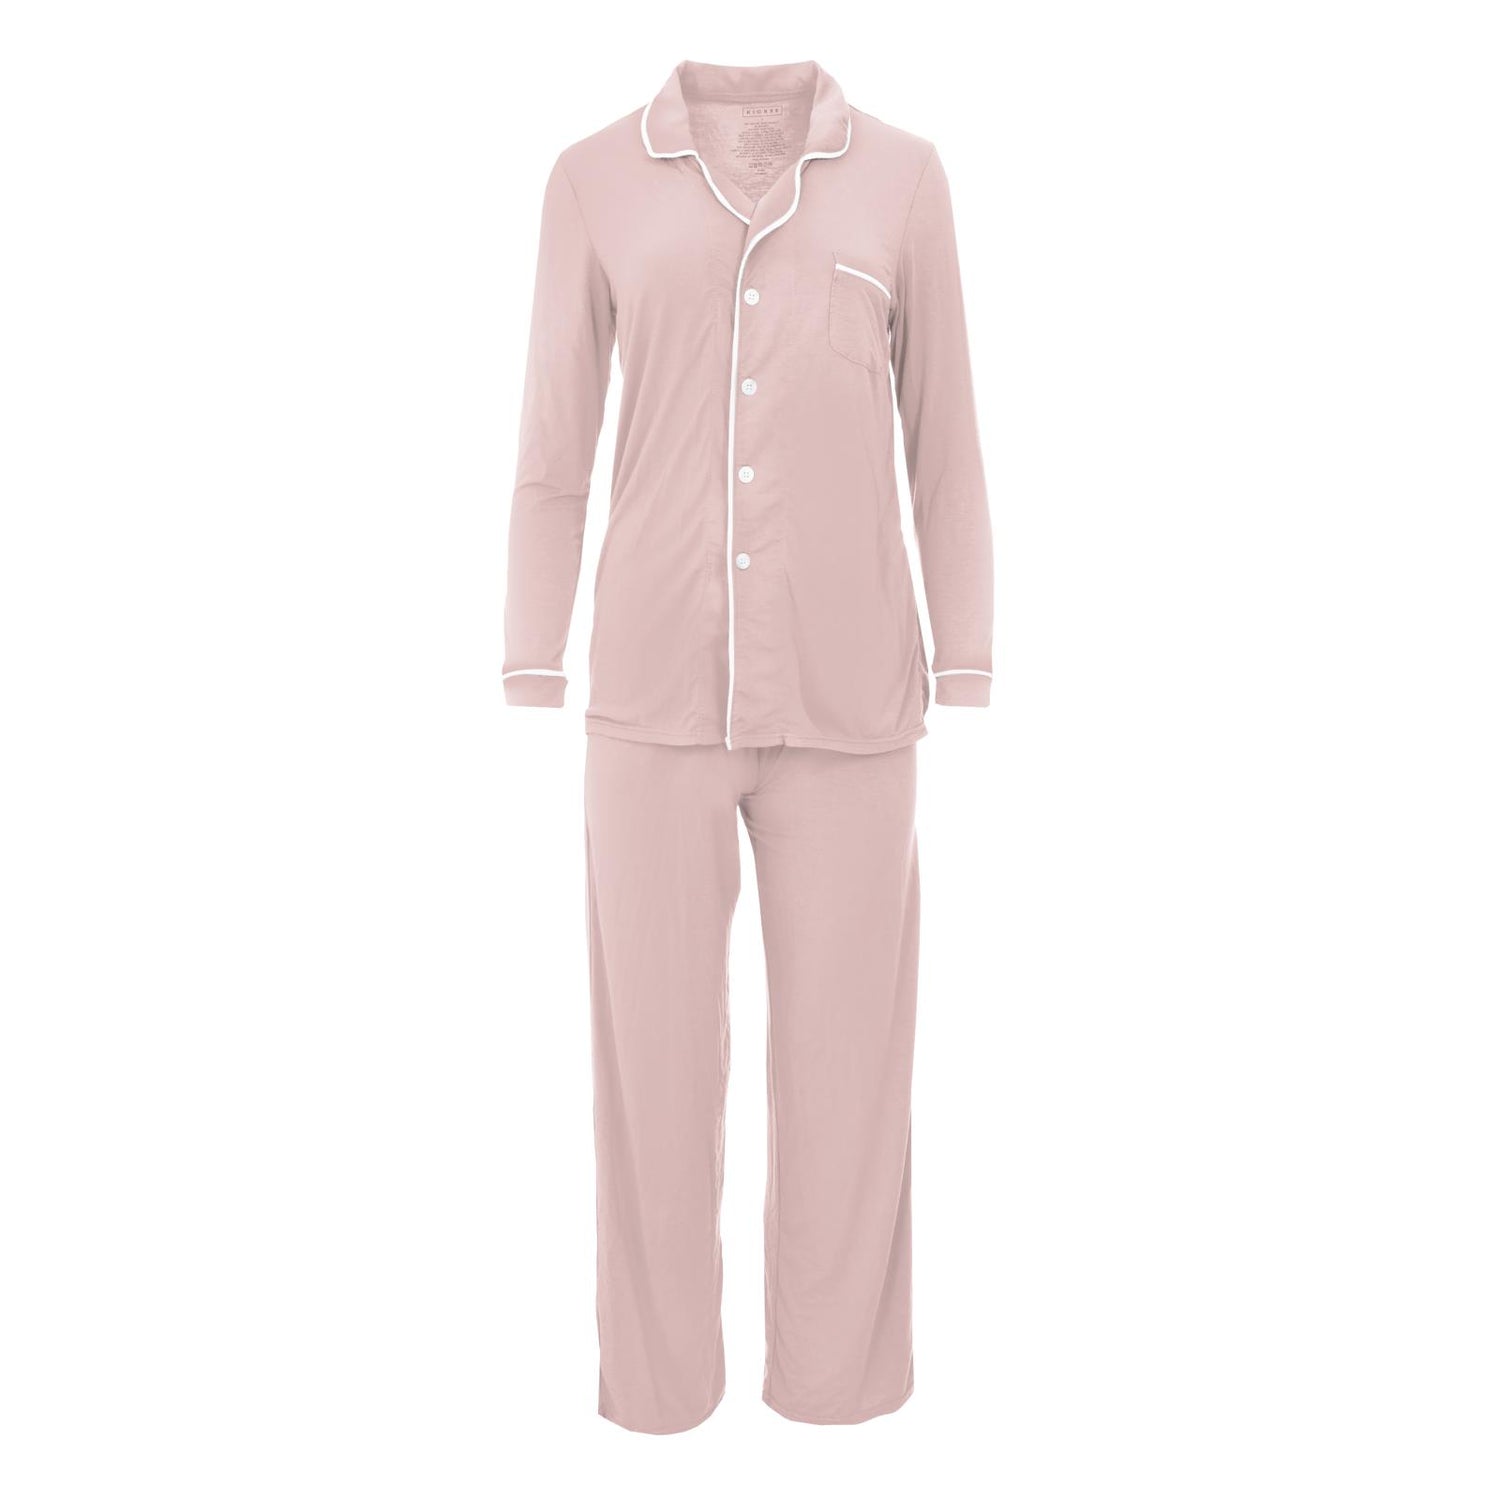 Women's Long Sleeved Collared Pajama Set in Baby Rose with Natural